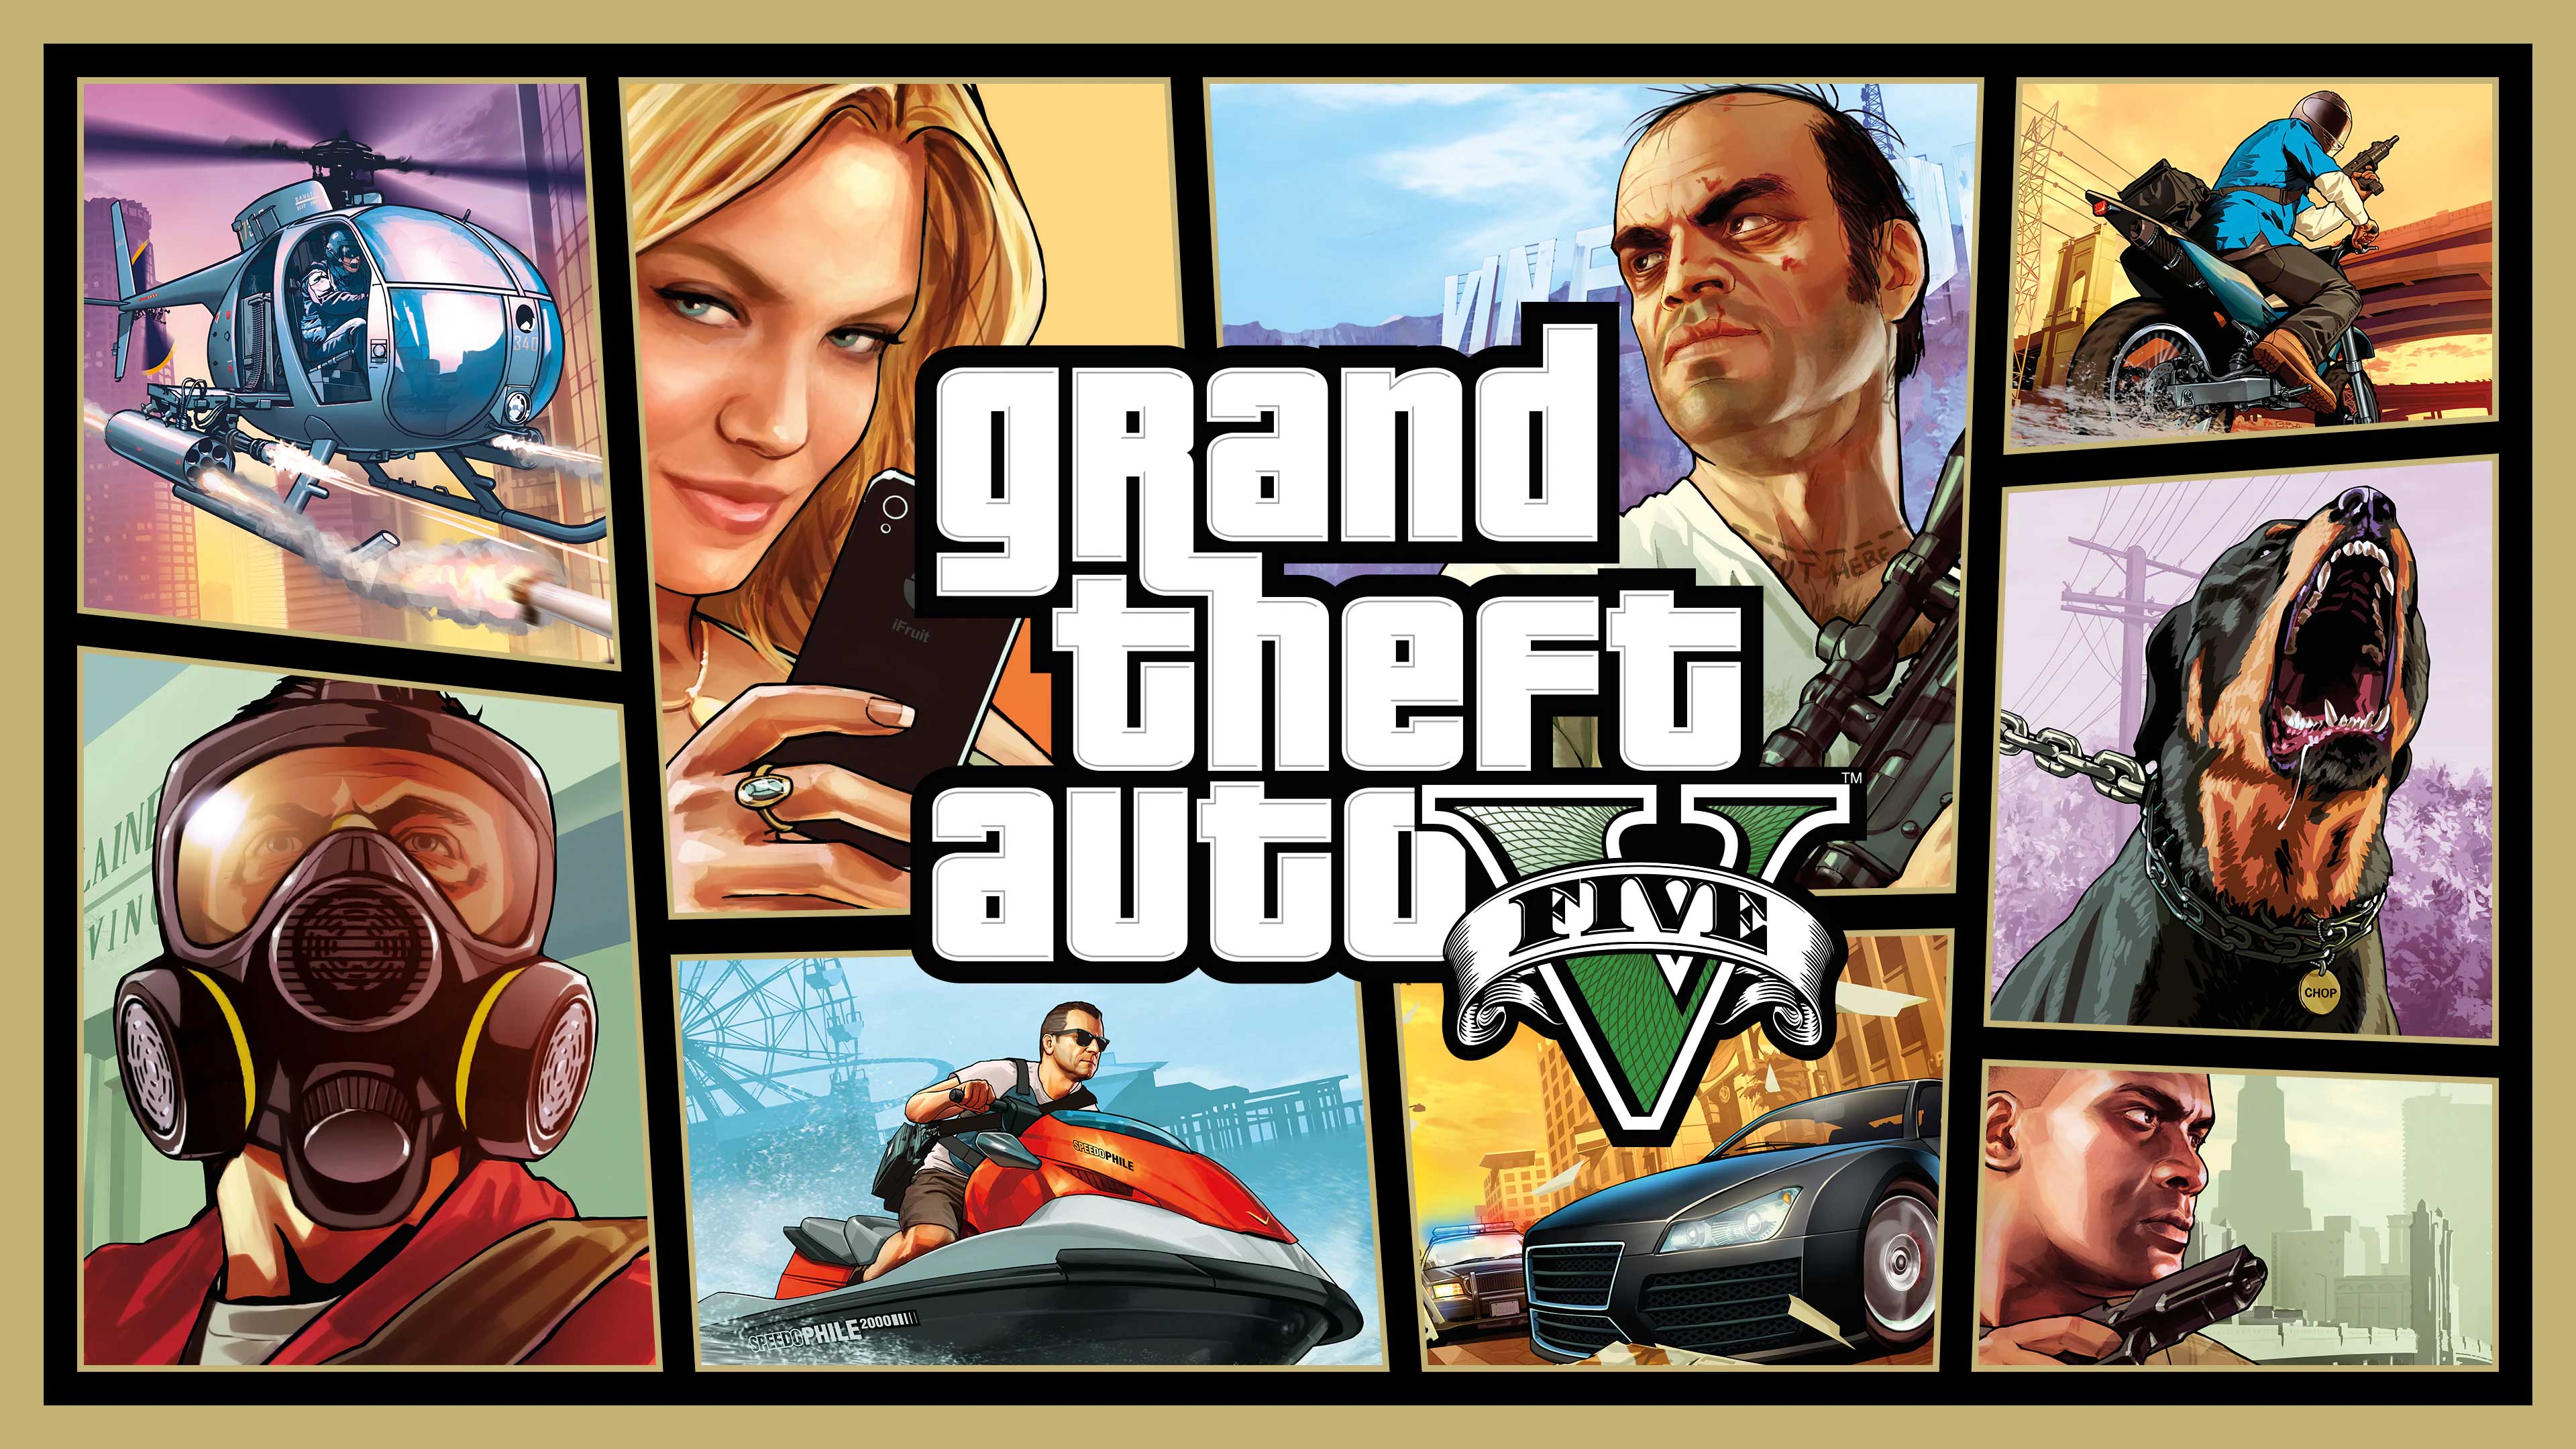 Grand Theft Auto V, What Would You Gift, whatwouldyougift.com